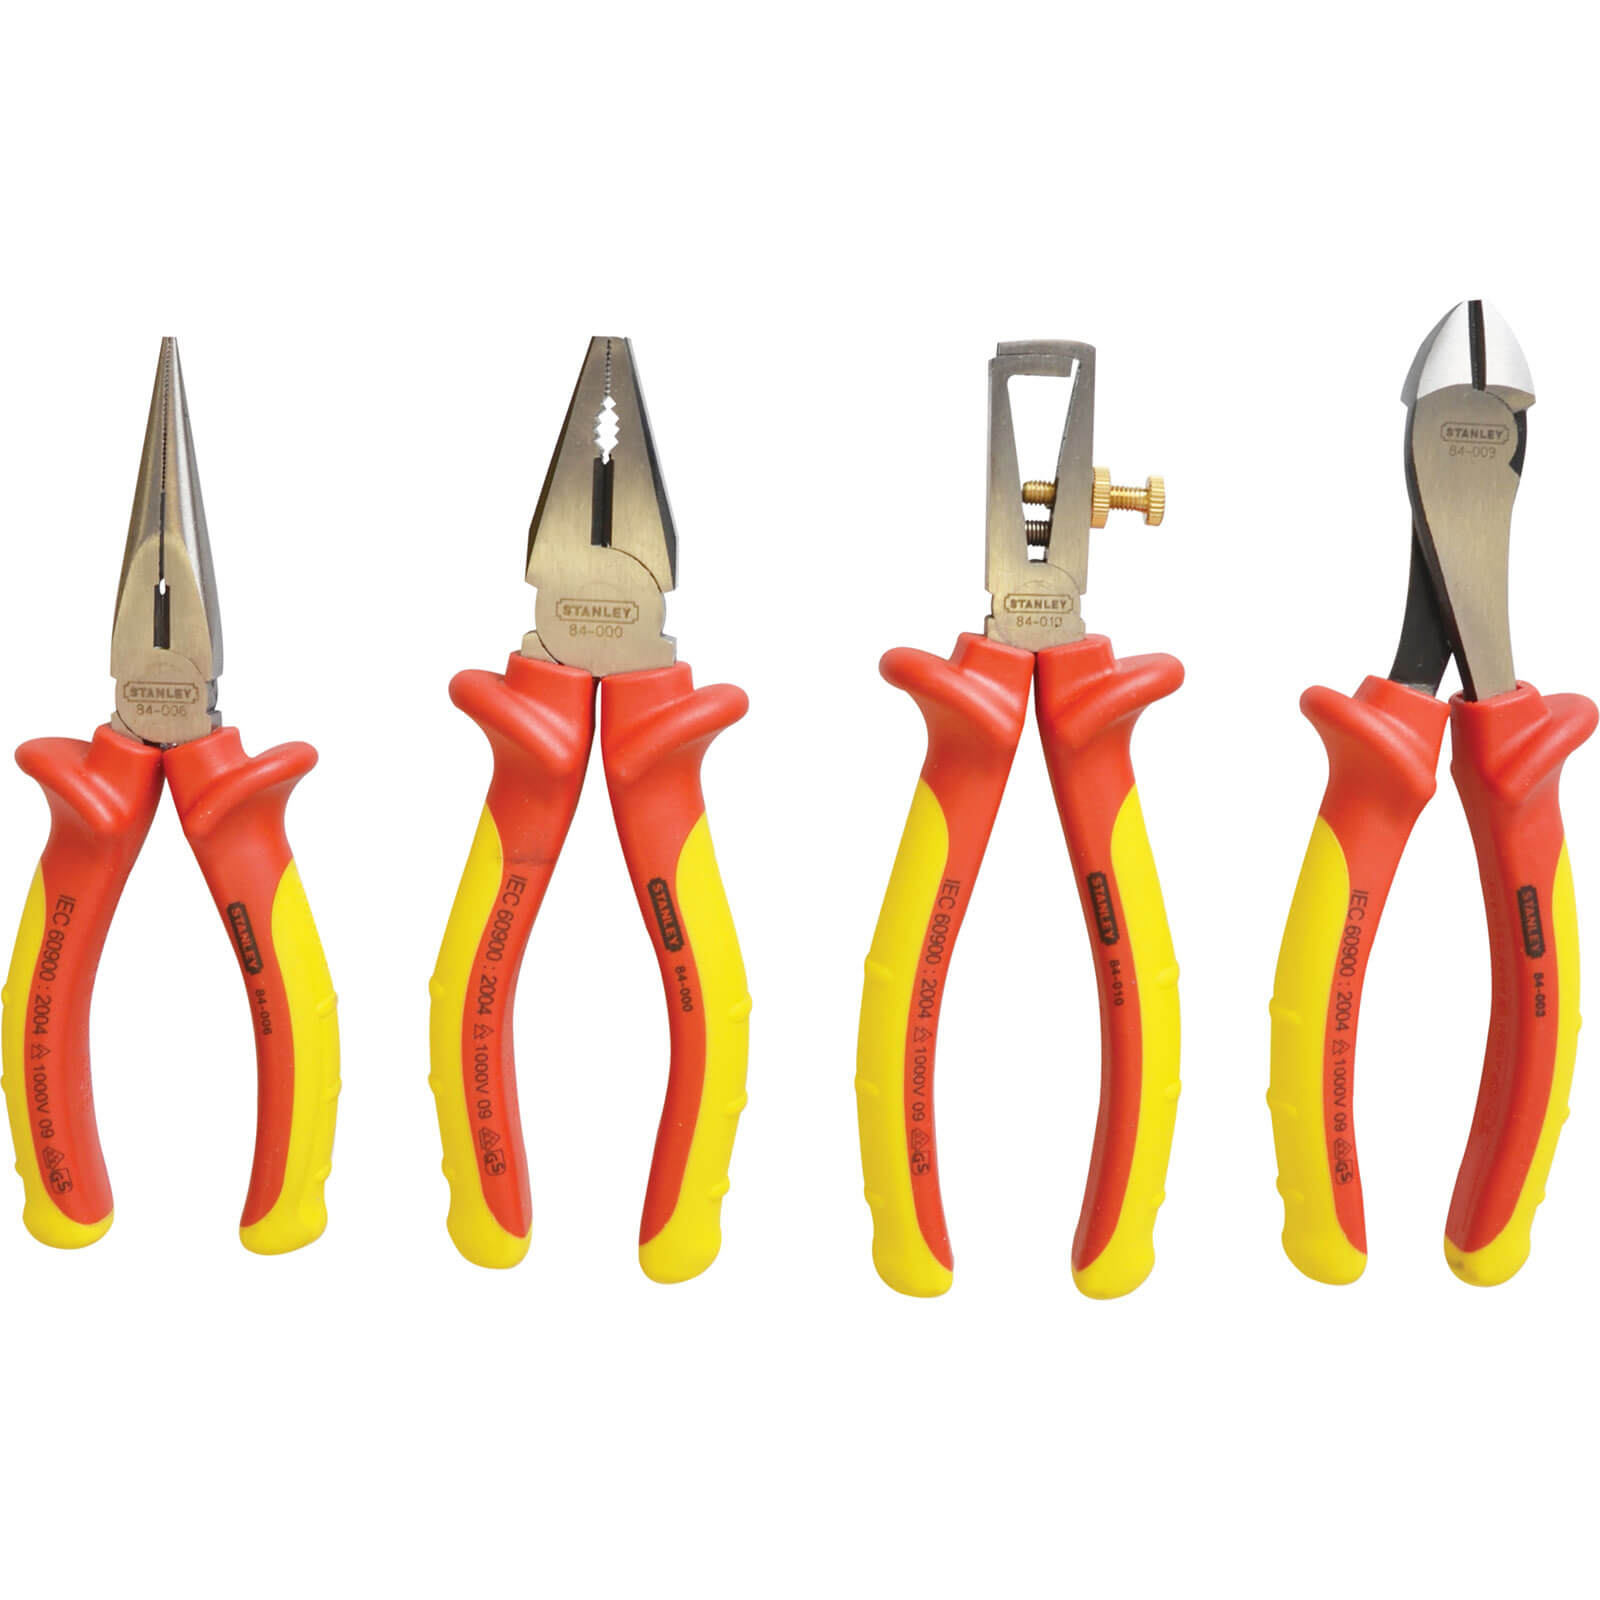 Image of Stanley FatMax 4 Piece VDE Insulated Plier Set